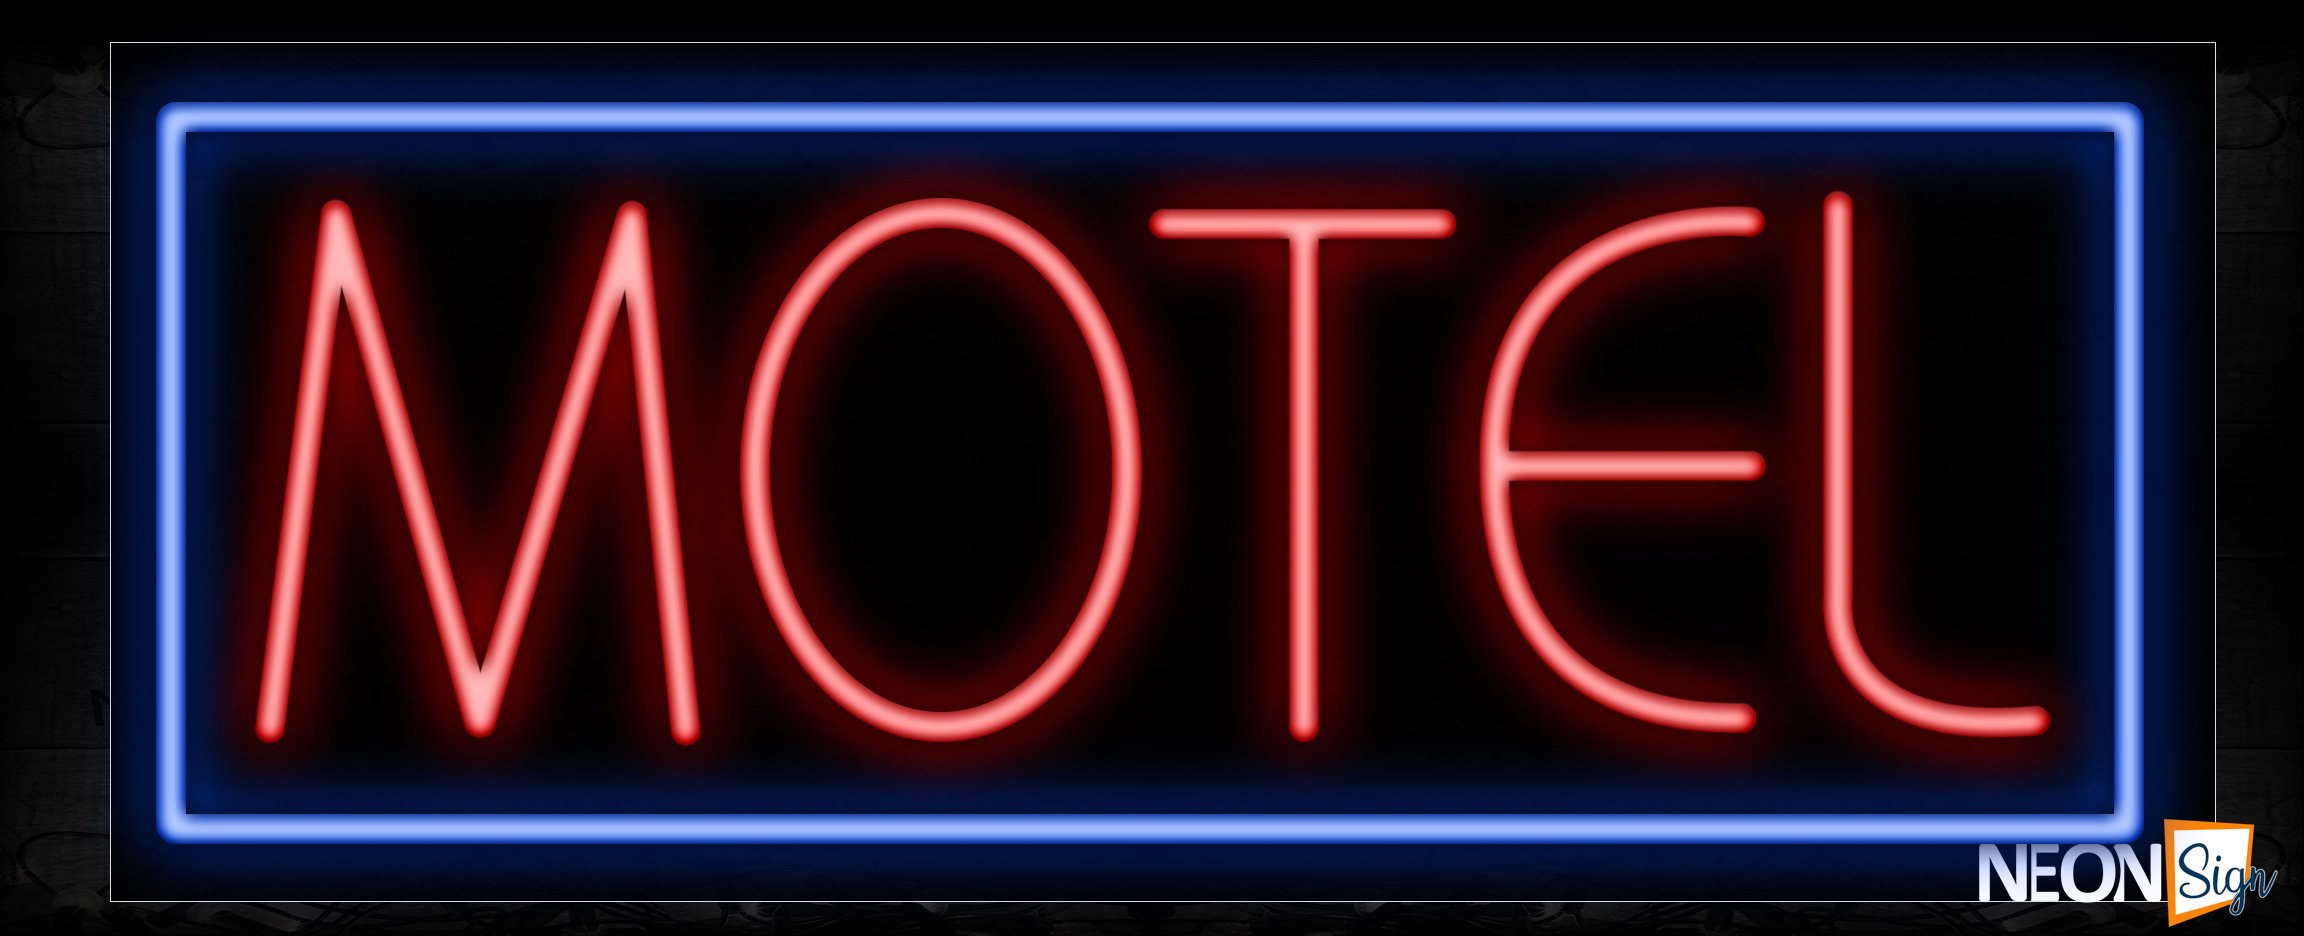 Image of 10579 Motel in red with blue border Neon Sign_13x32 Black Backing